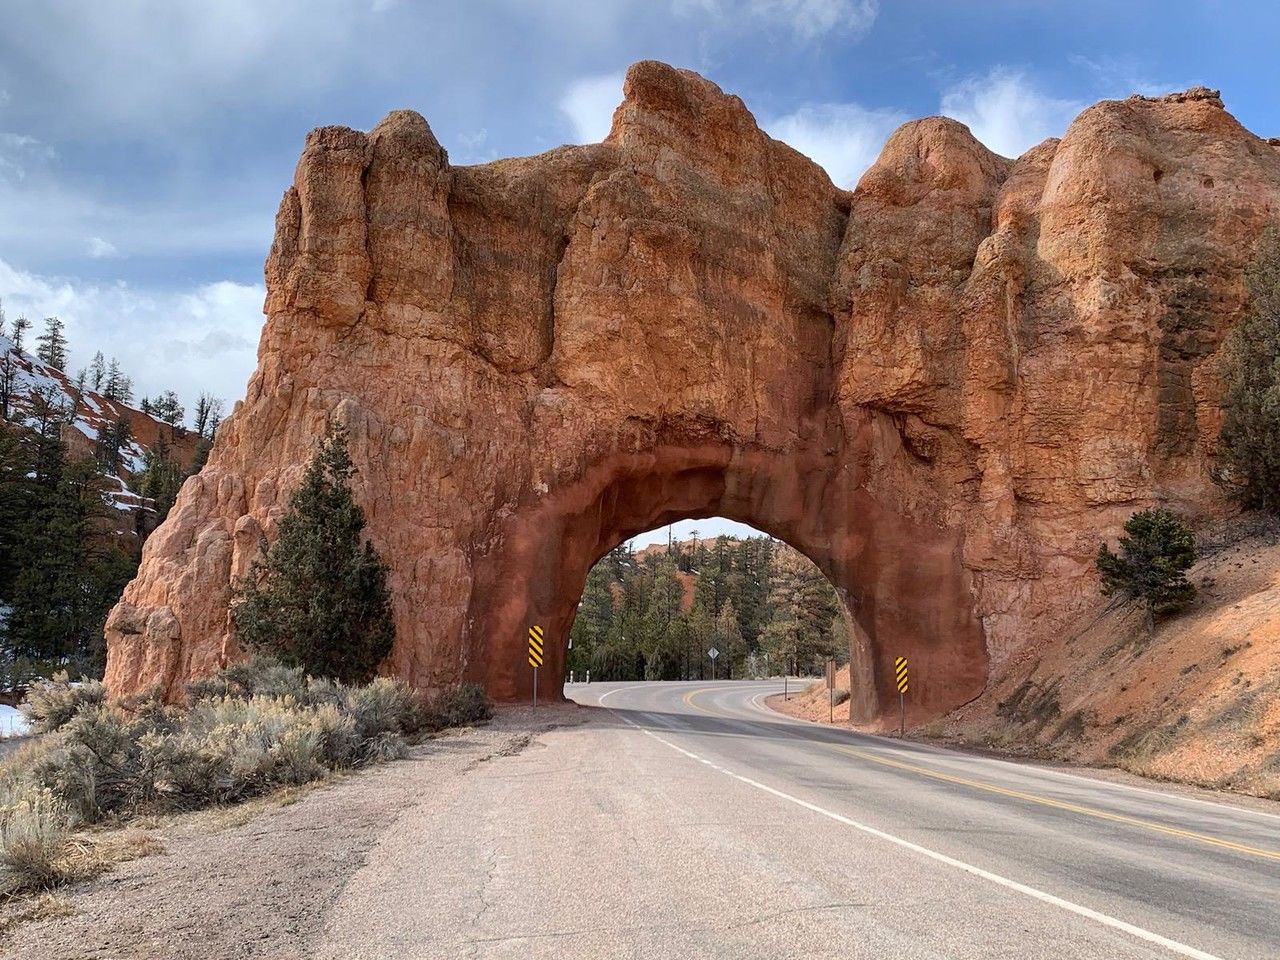 rock, road, rock formation, arch, sky, nature, landscape, scenics - nature, environment, travel destinations, cloud, transportation, land, travel, beauty in nature, no people, non-urban scene, plant, tree, desert, valley, natural arch, geology, the way forward, architecture, mountain, outdoors, tranquility, eroded, physical geography, semi-arid, day, extreme terrain, tourism, canyon, street, highway, footpath